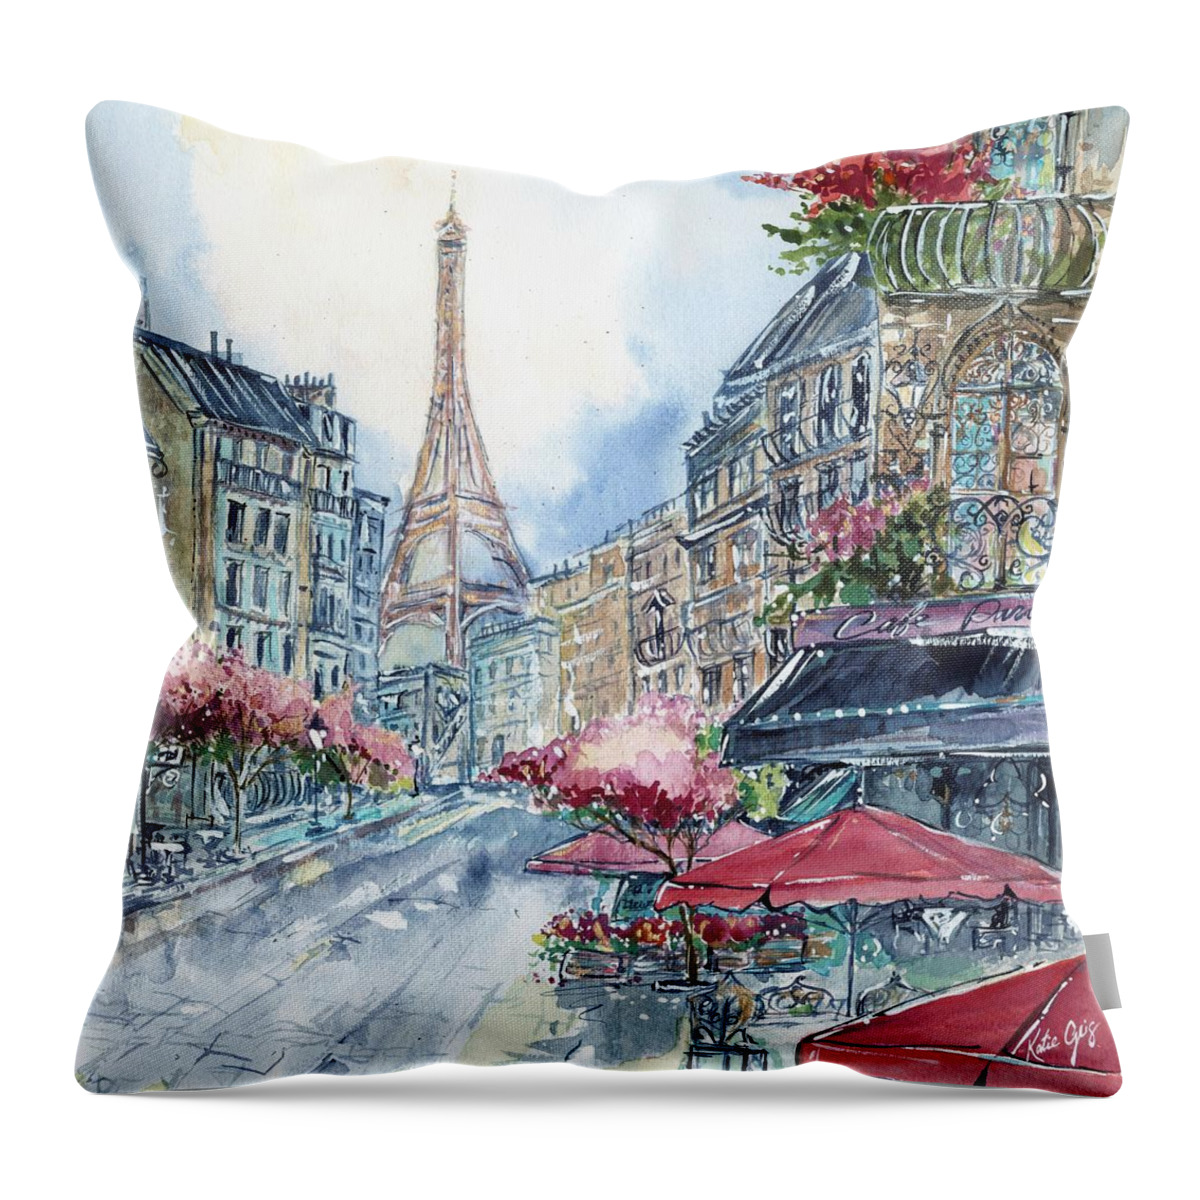  Throw Pillow featuring the painting Paris Cafe by Katie Geis